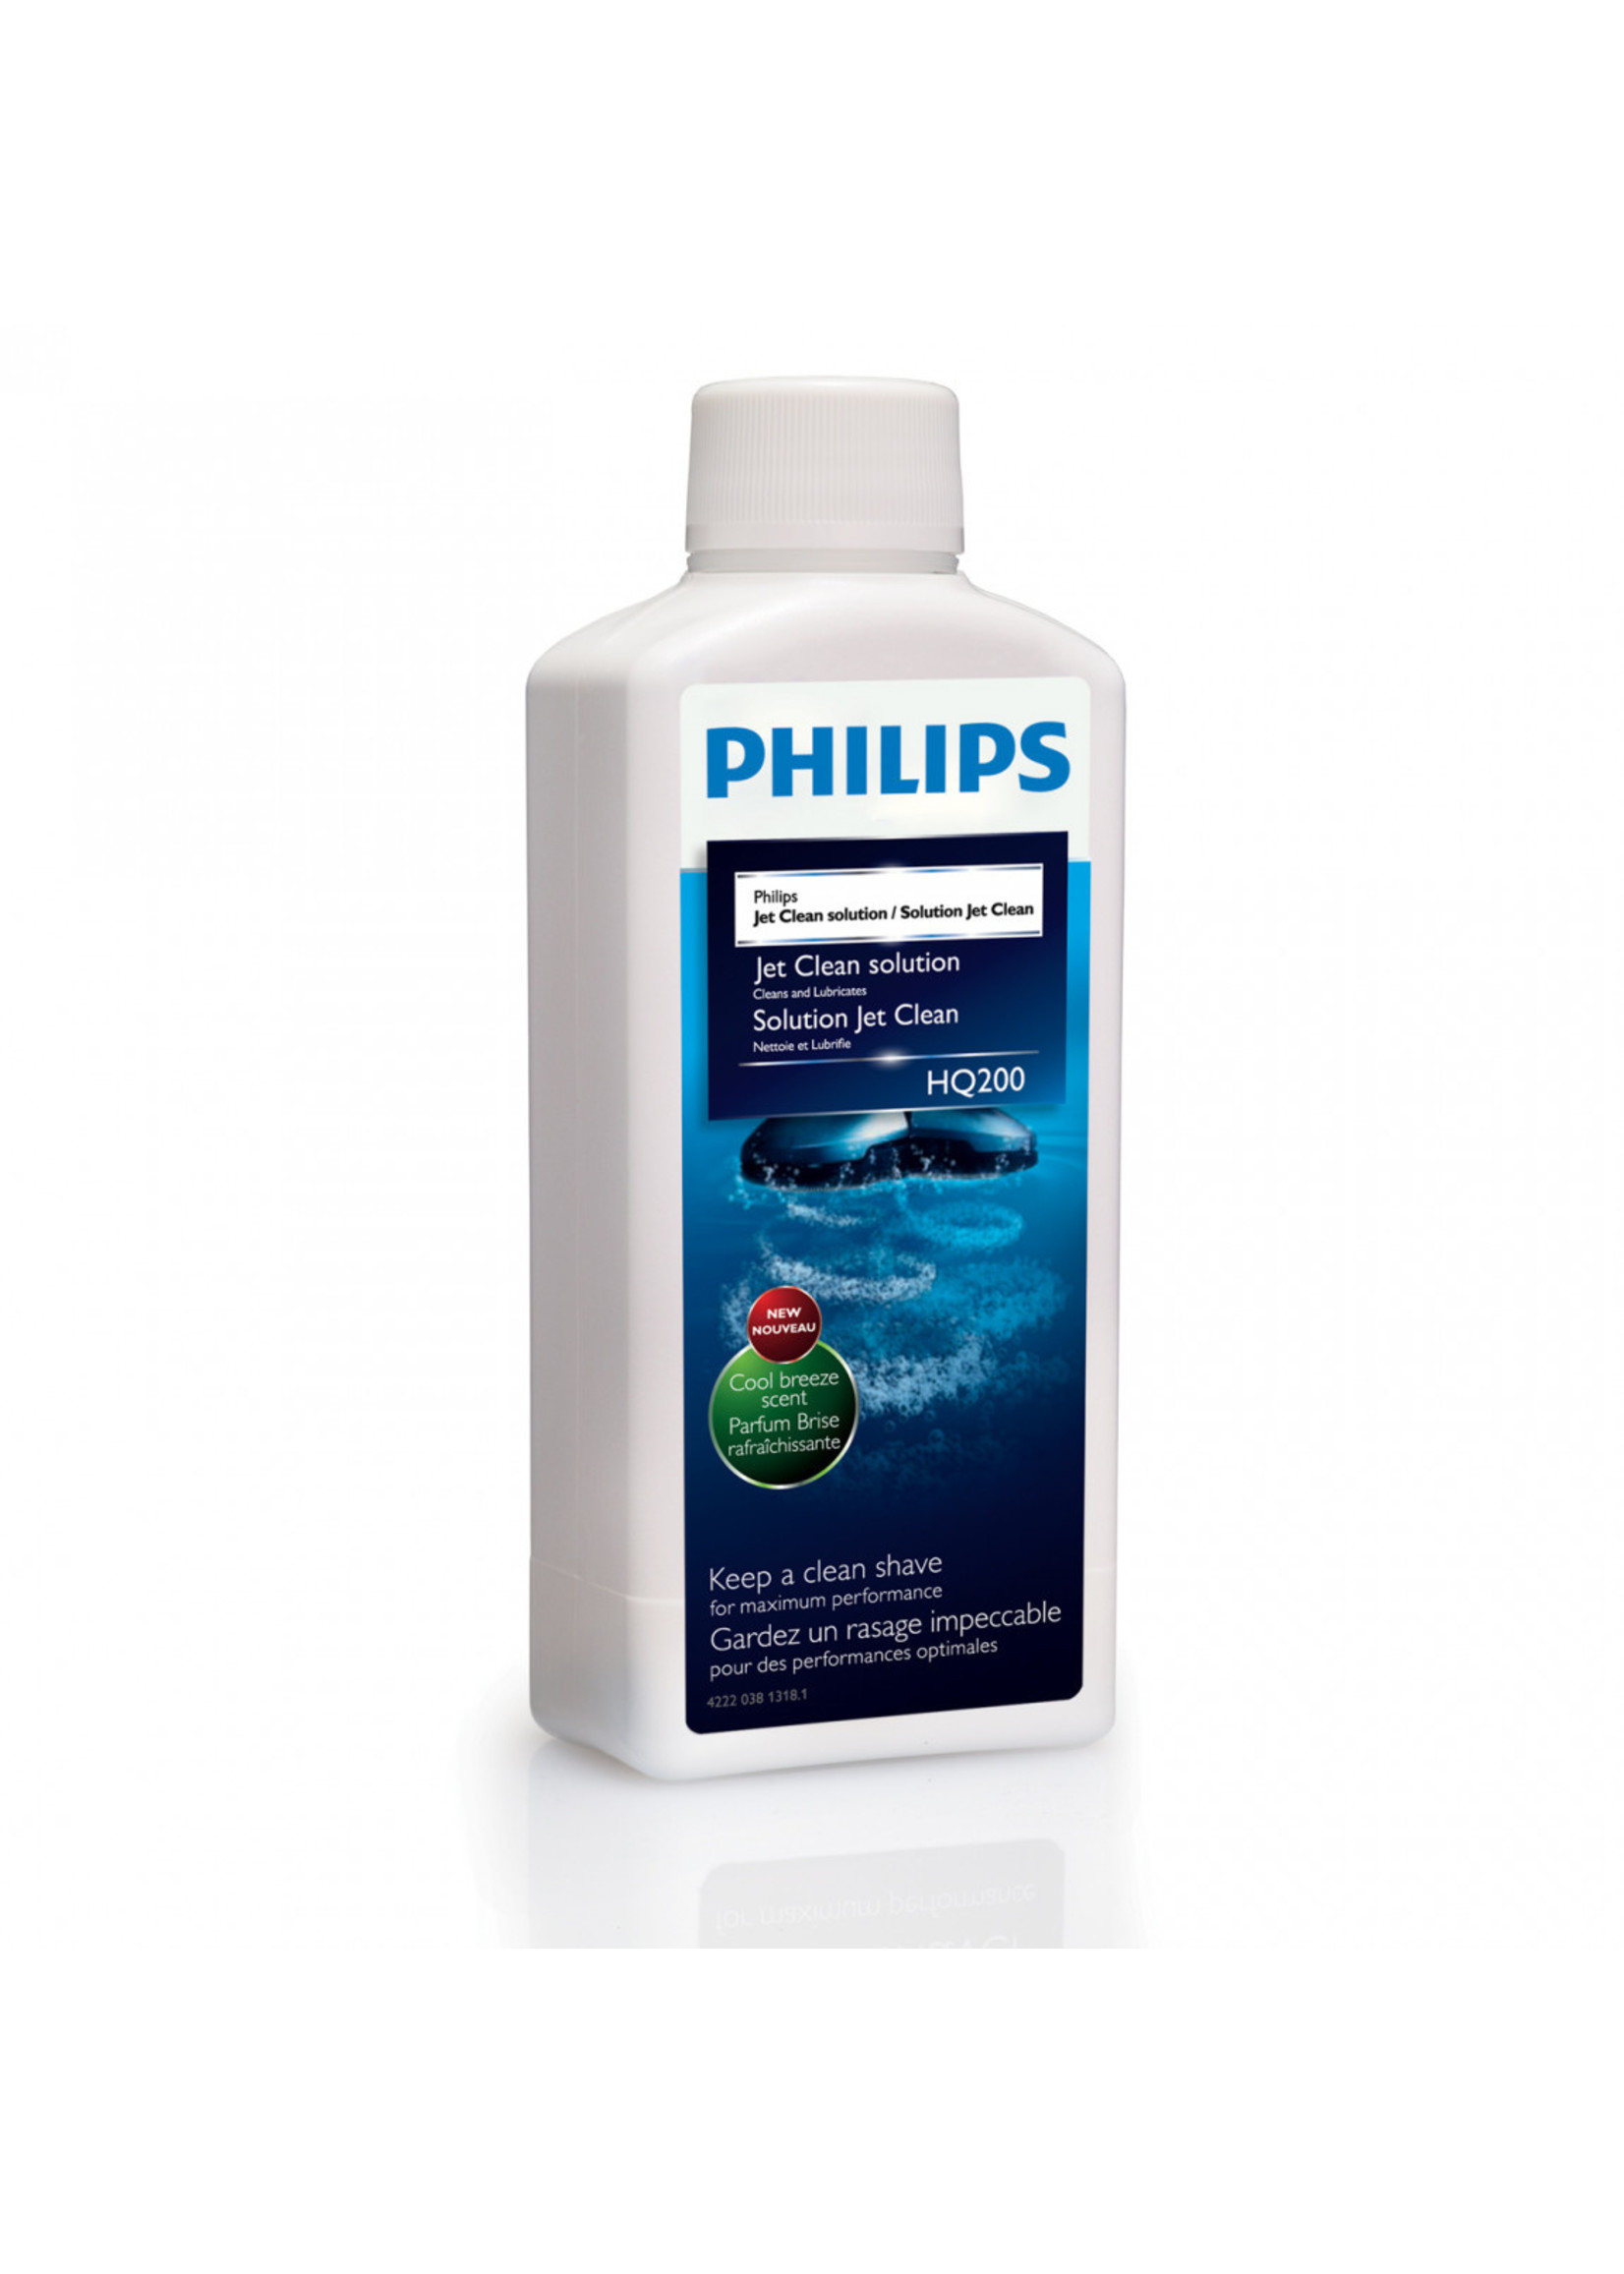 PHILIPS HQ200/53 SOLUTION SYSTEME JET CLEAN